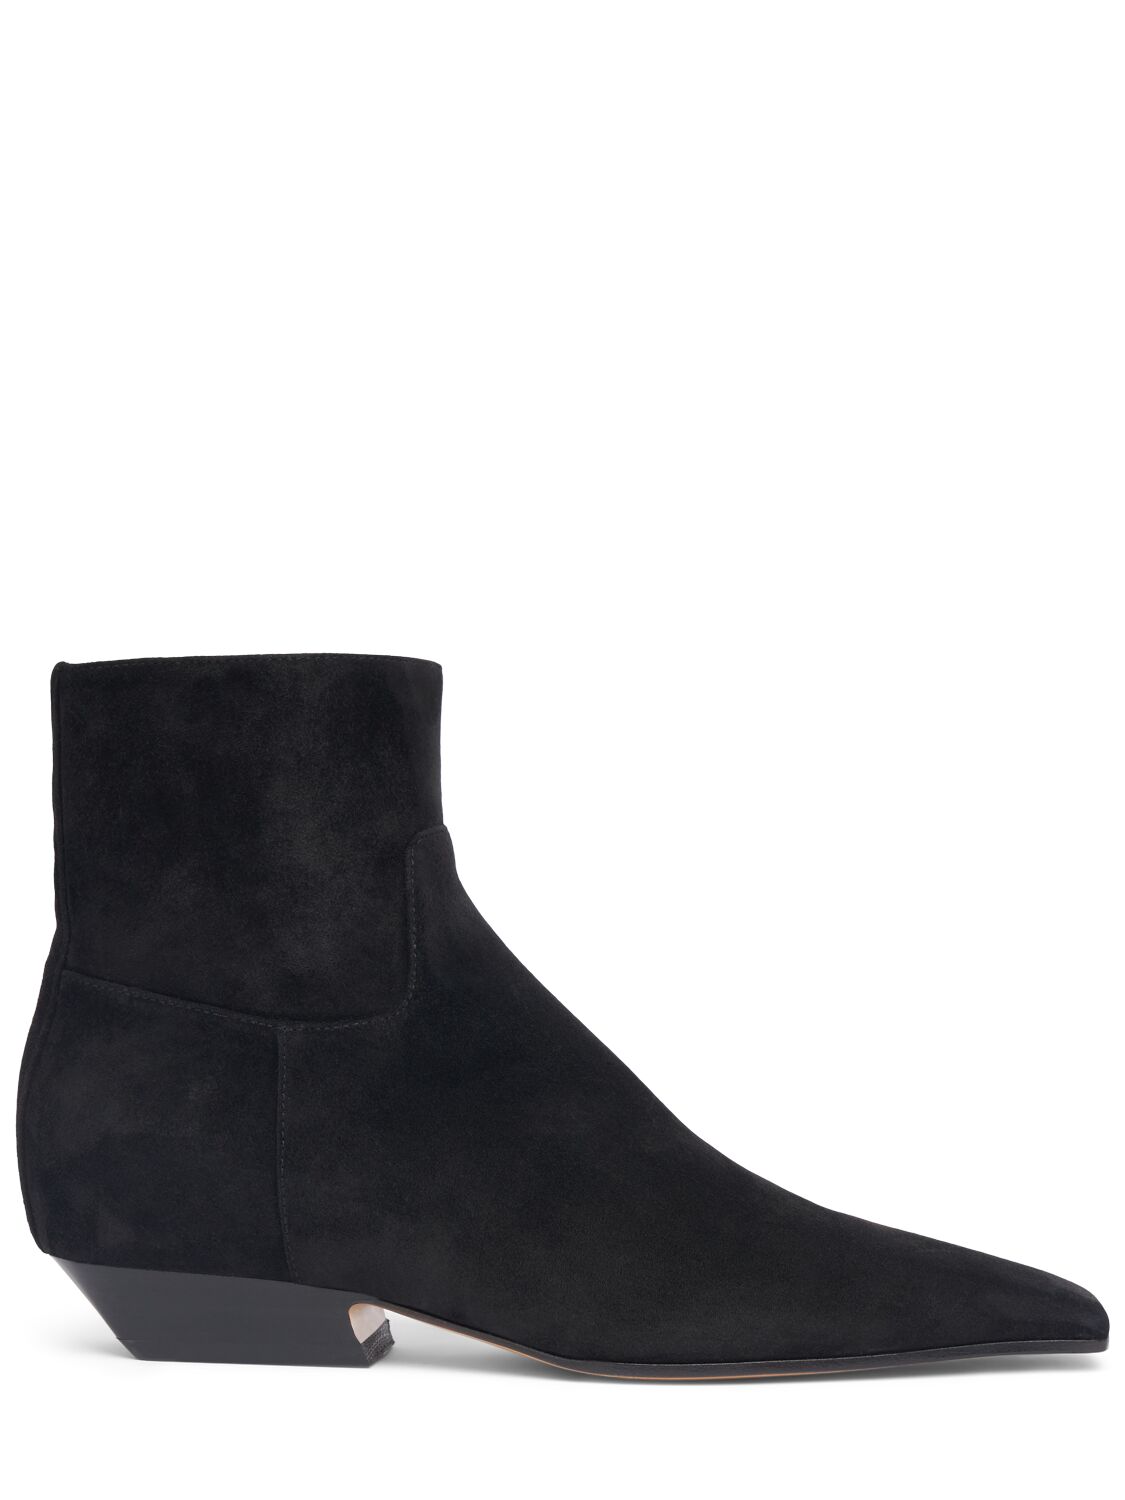 Khaite 25mm Marfa Suede Ankle Boots In Black